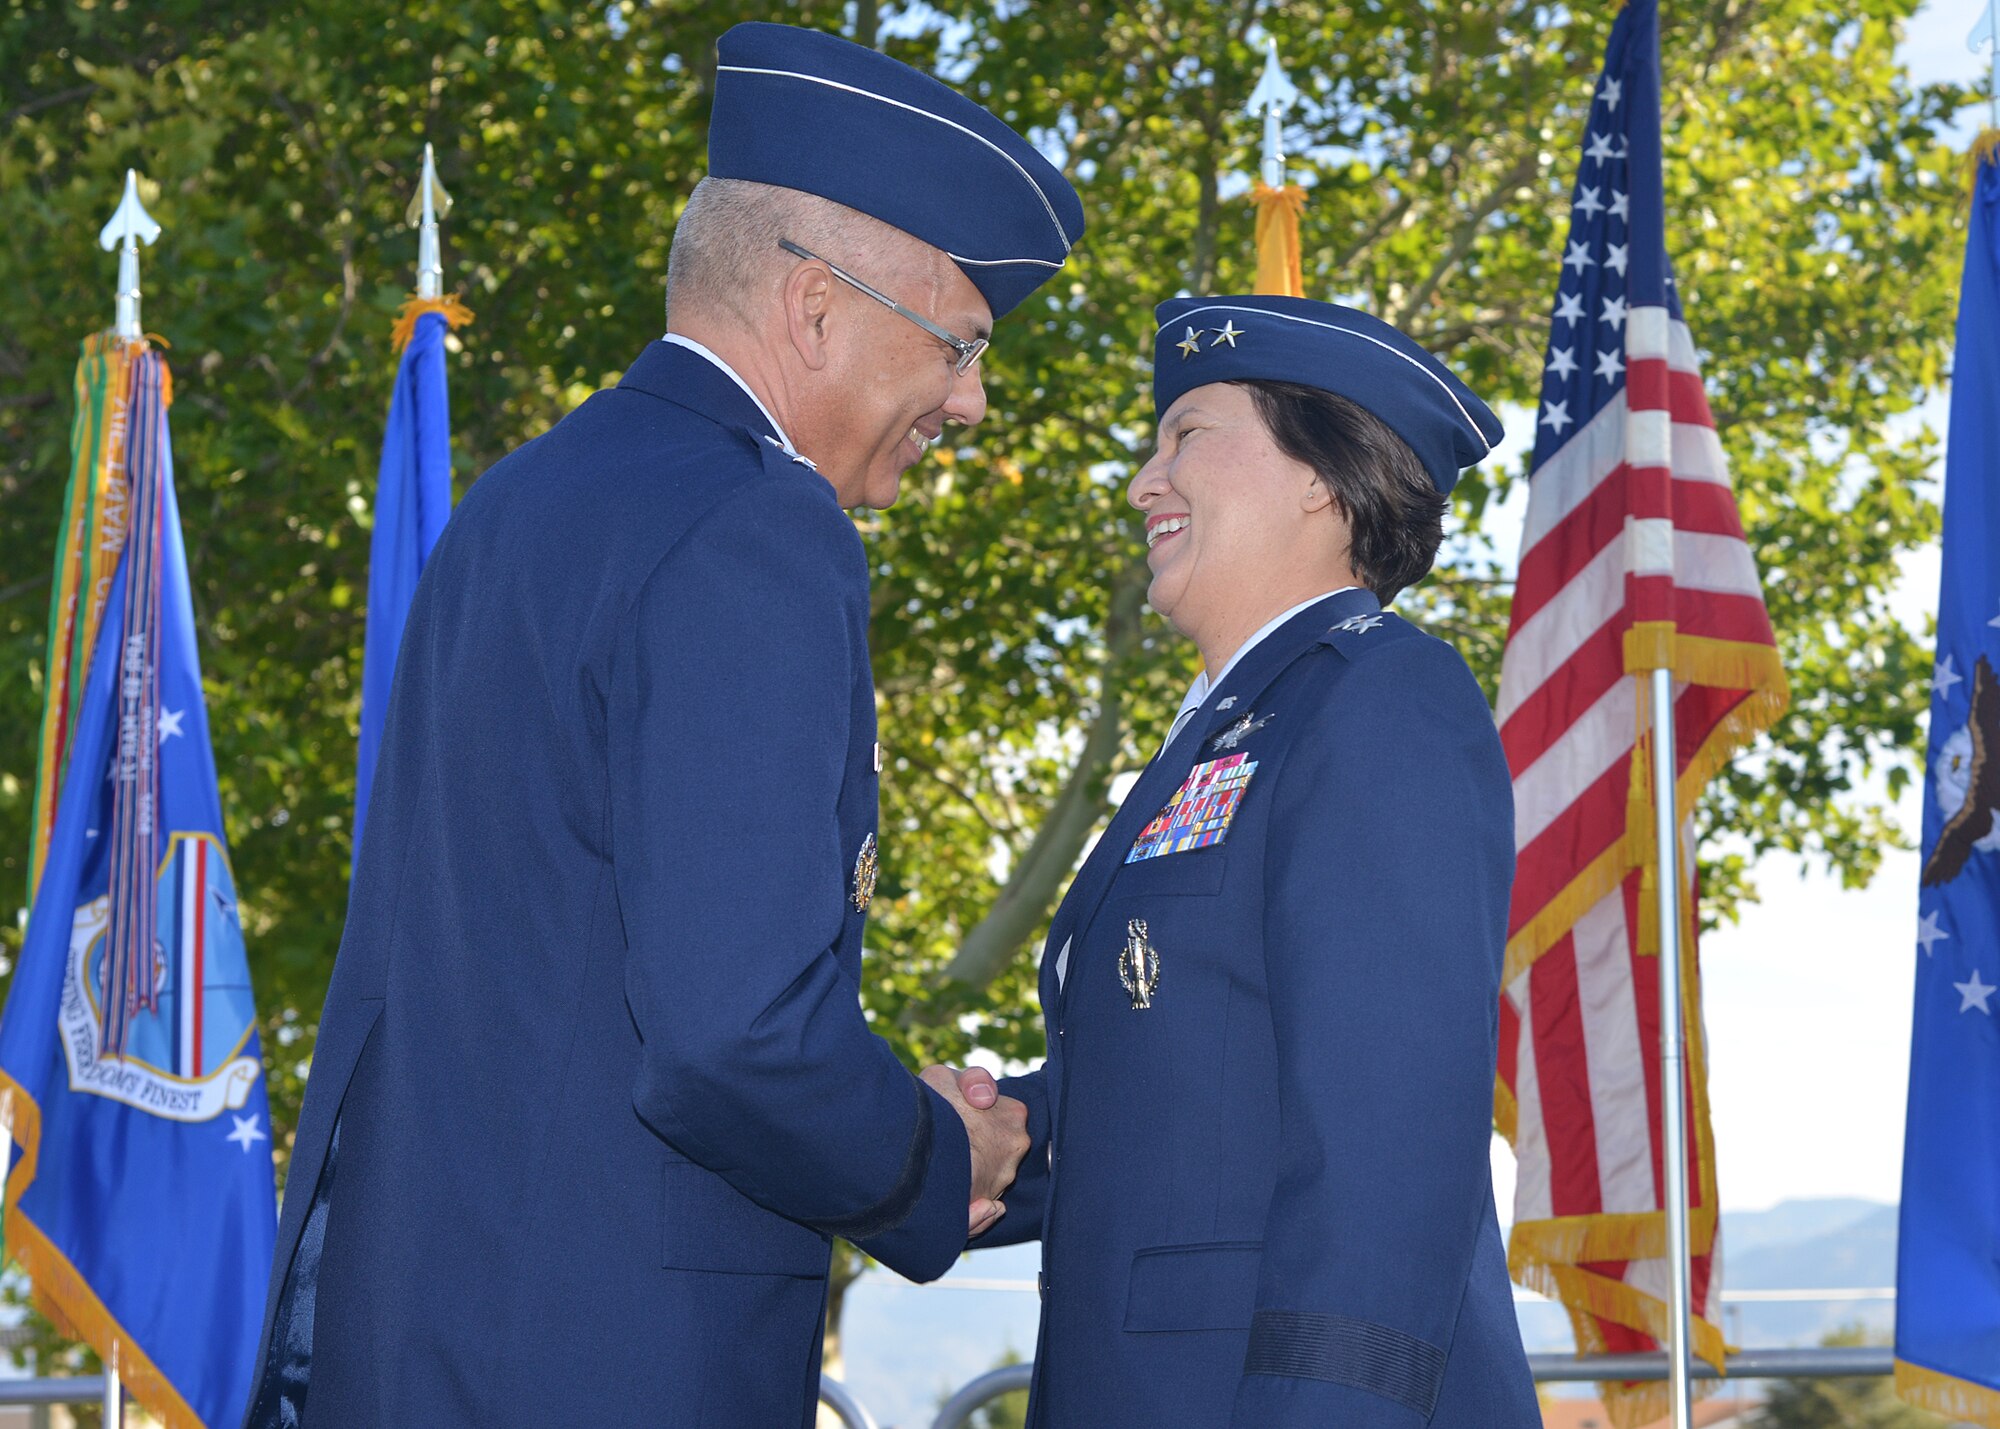 Maj. Gens. Jack Weinstein, 20th Air Force commander, and Sandra Finan, Air Force Nuclear Weapon Center commander, shake hands Oct. 1, 2015, on Kirtland Air Force Base, N.M., during a ceremony transferring administrative control of the 377th Air Base Wing from the AFNWC to the 20th AF. The consolidation of the 377th along with the three AF ICBM wings into 20th AF is specifically intended to help streamline the nuclear enterprise by placing operational mission support within the AF’s nuclear major command.  (U.S. Air Force photo by Todd Berenger)